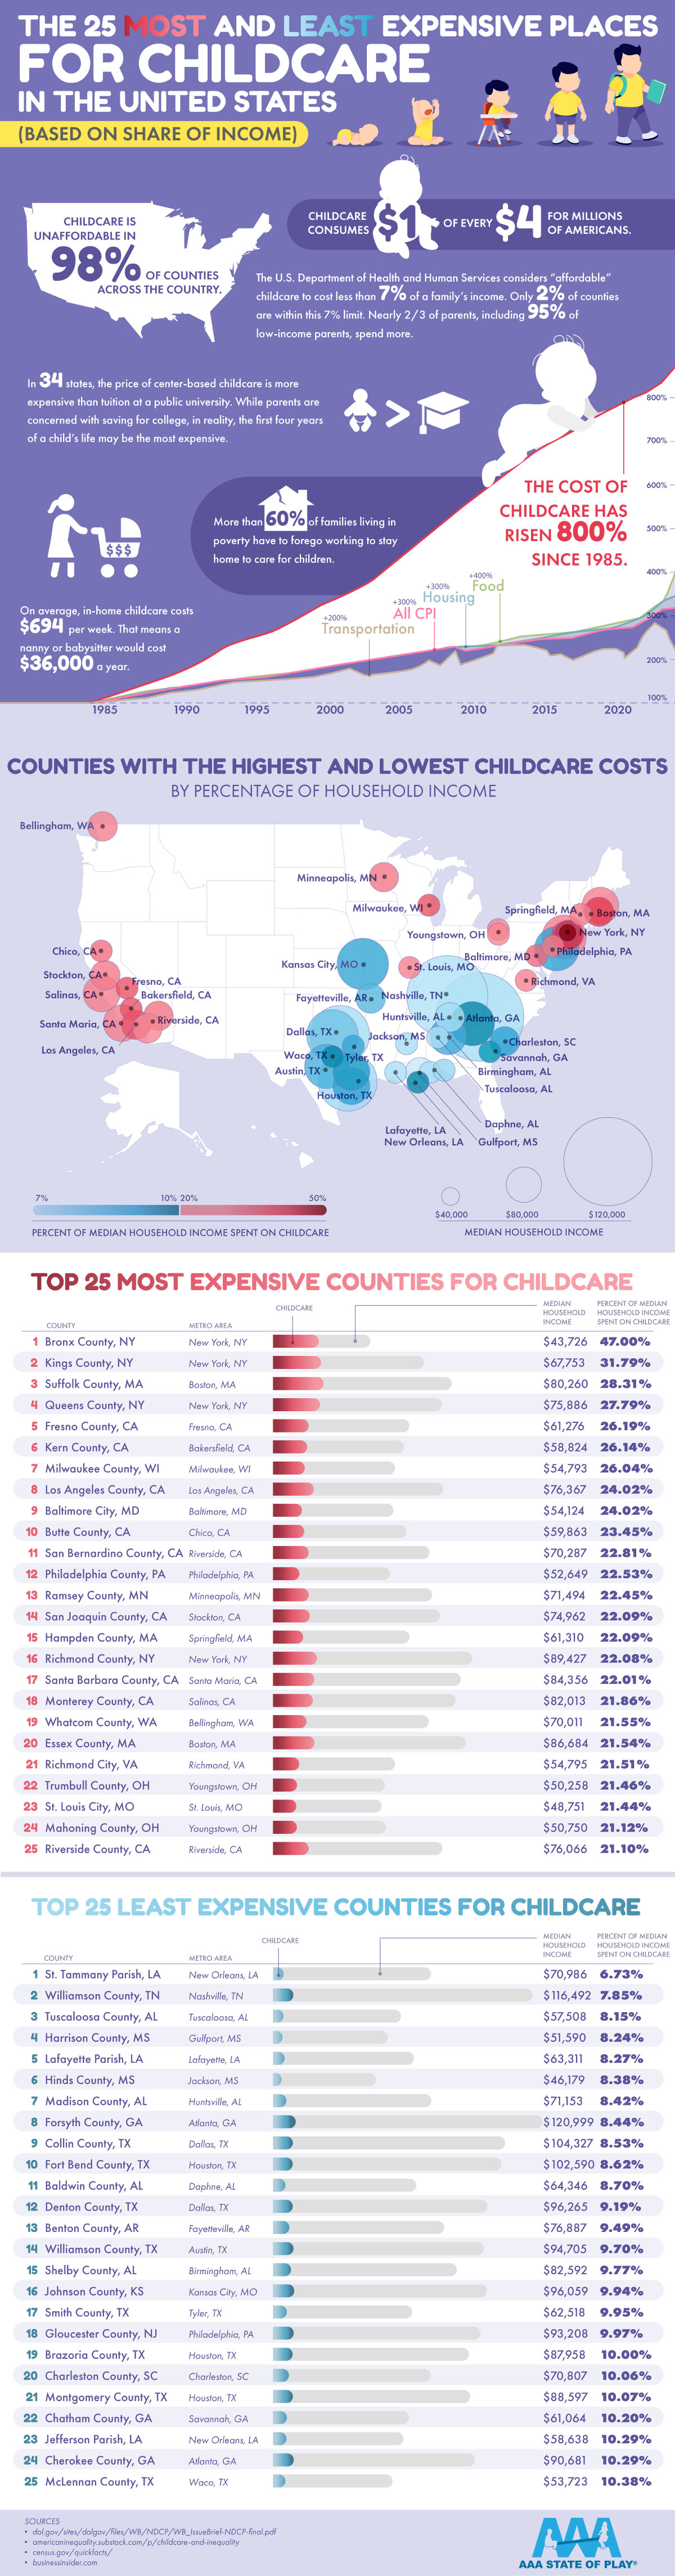 The Most Expensive and Least Expensive Places for Childcare